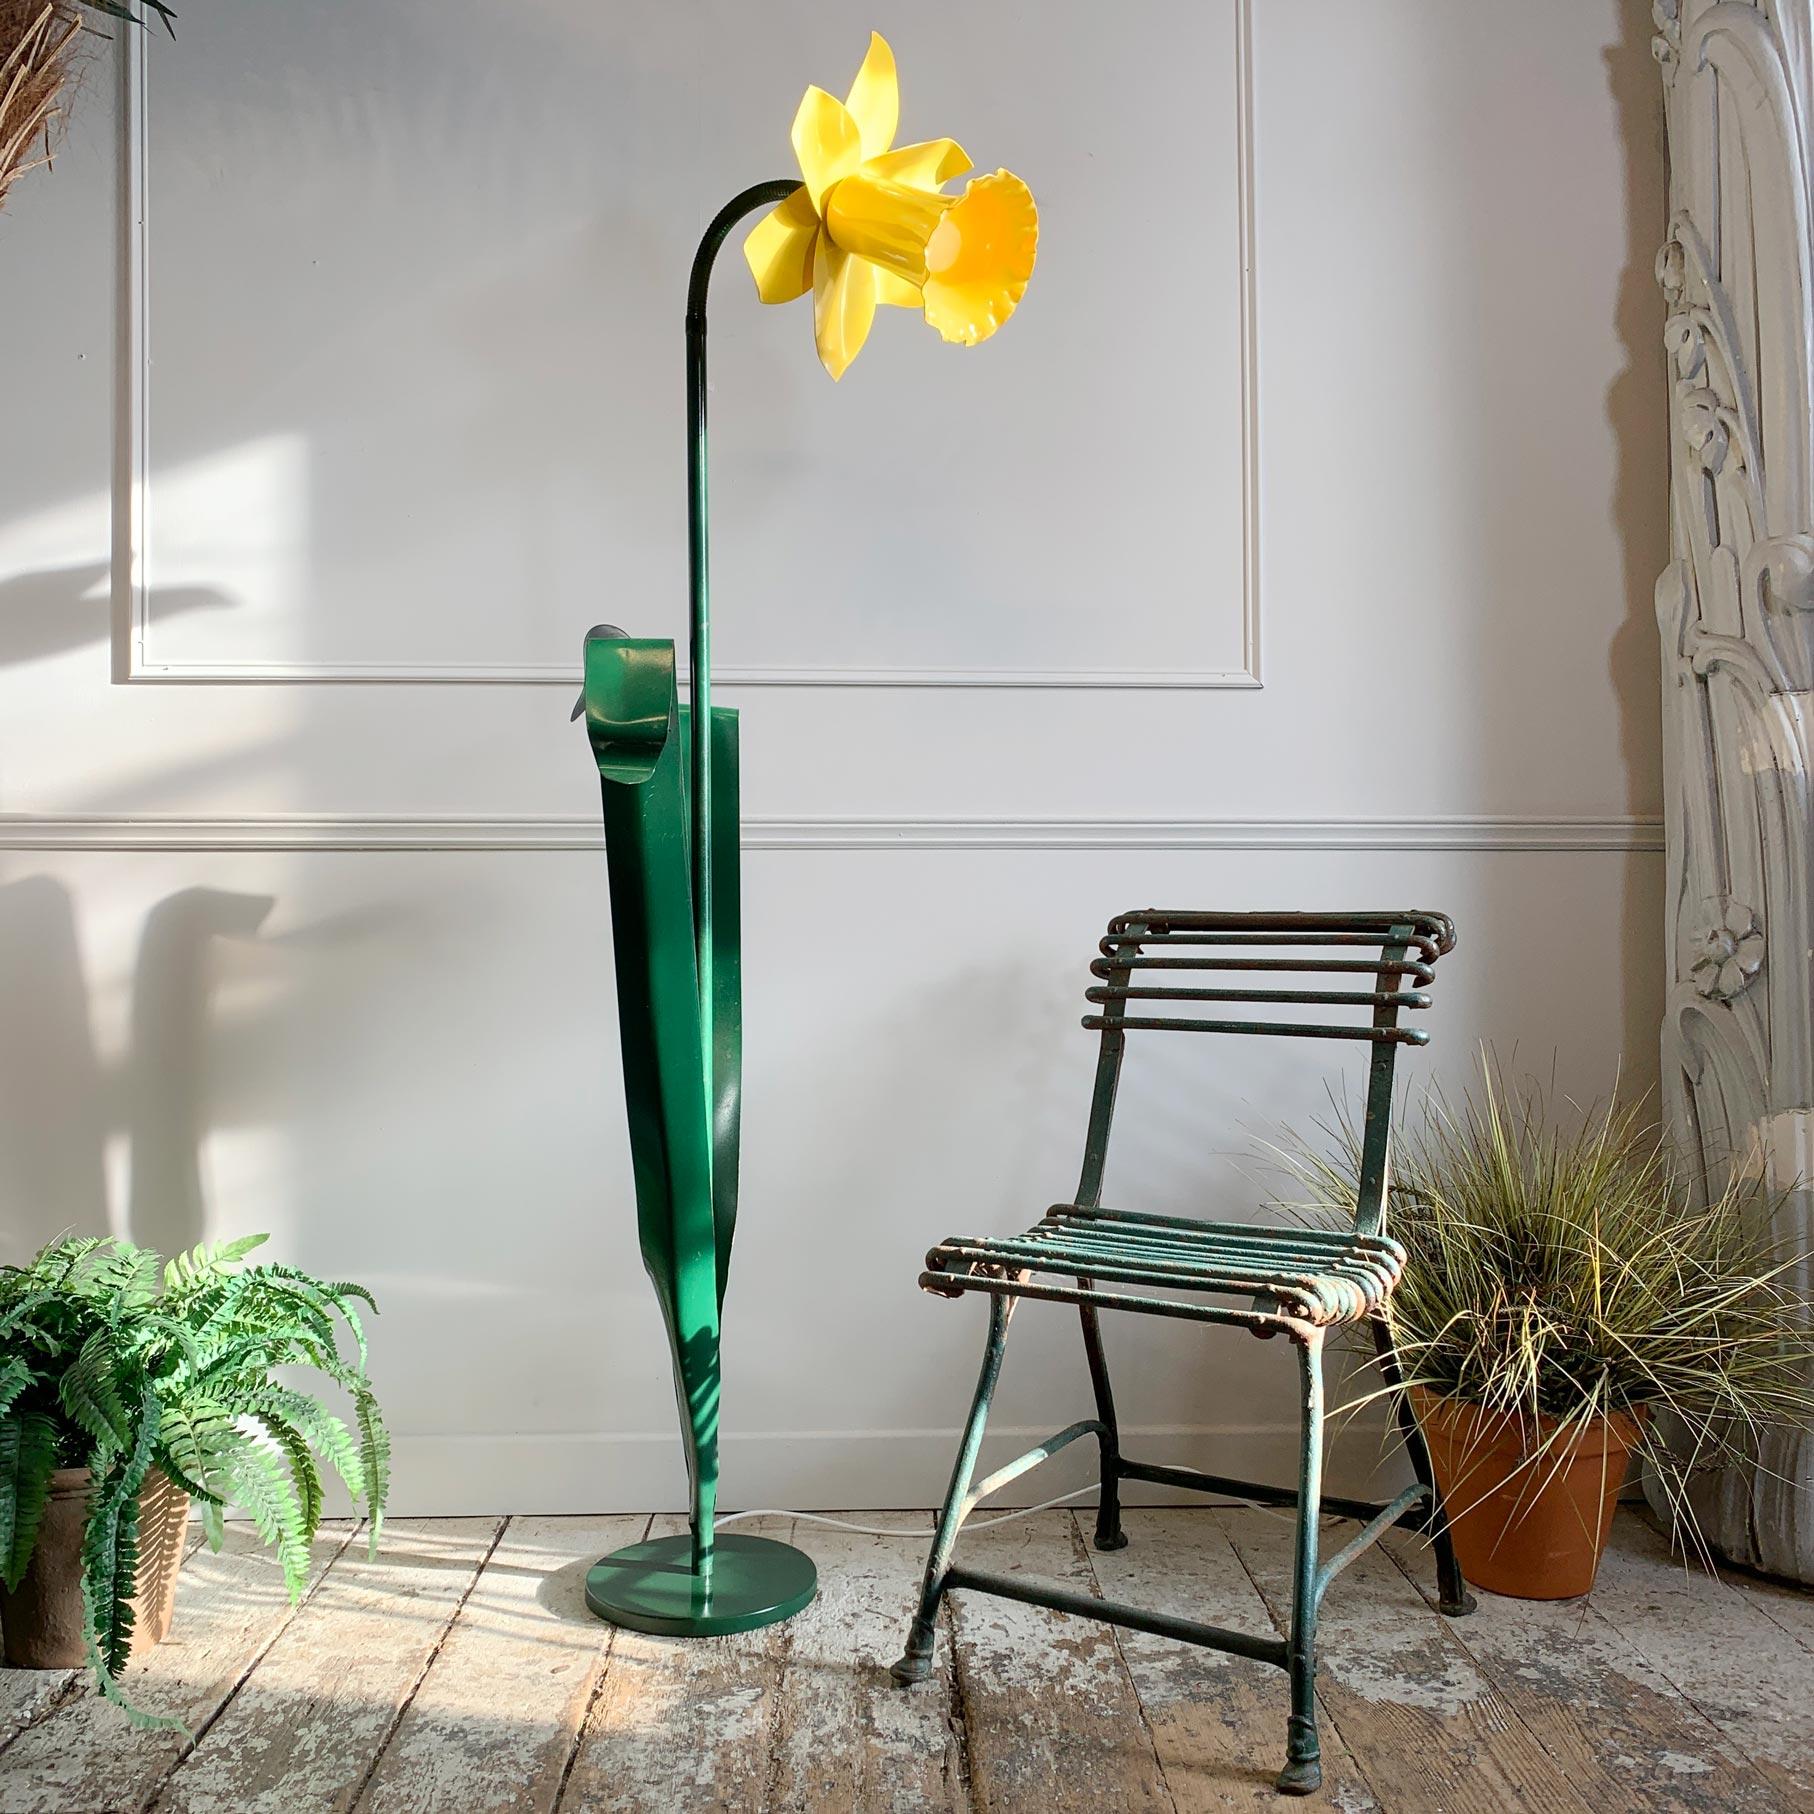 A very large and rare bliss daffodil floor lamp.

Iconic bright yellow daffodil floor lamp designed by Mike Bliss 1985. This adjustable neck designer lamp in painted steel is from the UK and is in very good vintage condition.

Some marks to the